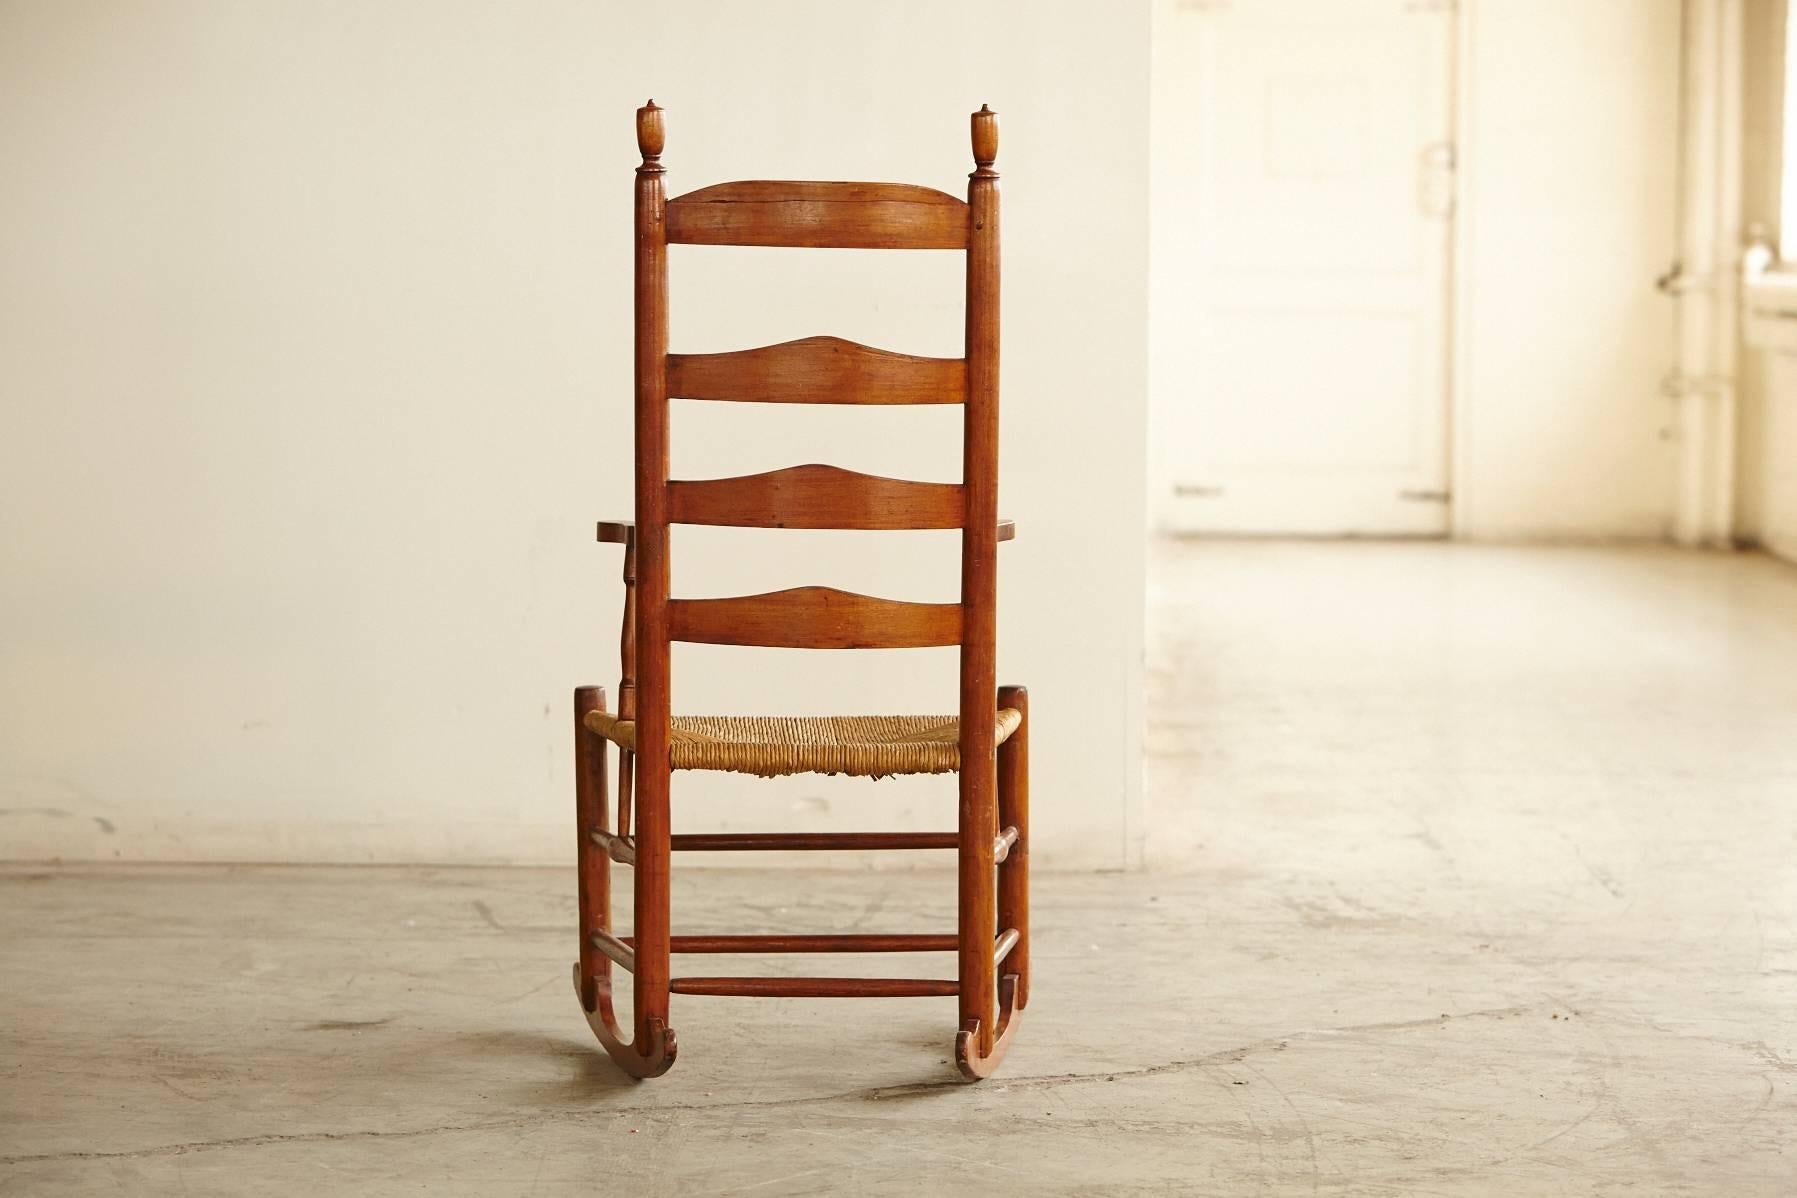 Hand-Crafted Early American Ladder Back Rocking Chair with Rush Seat, circa 1830